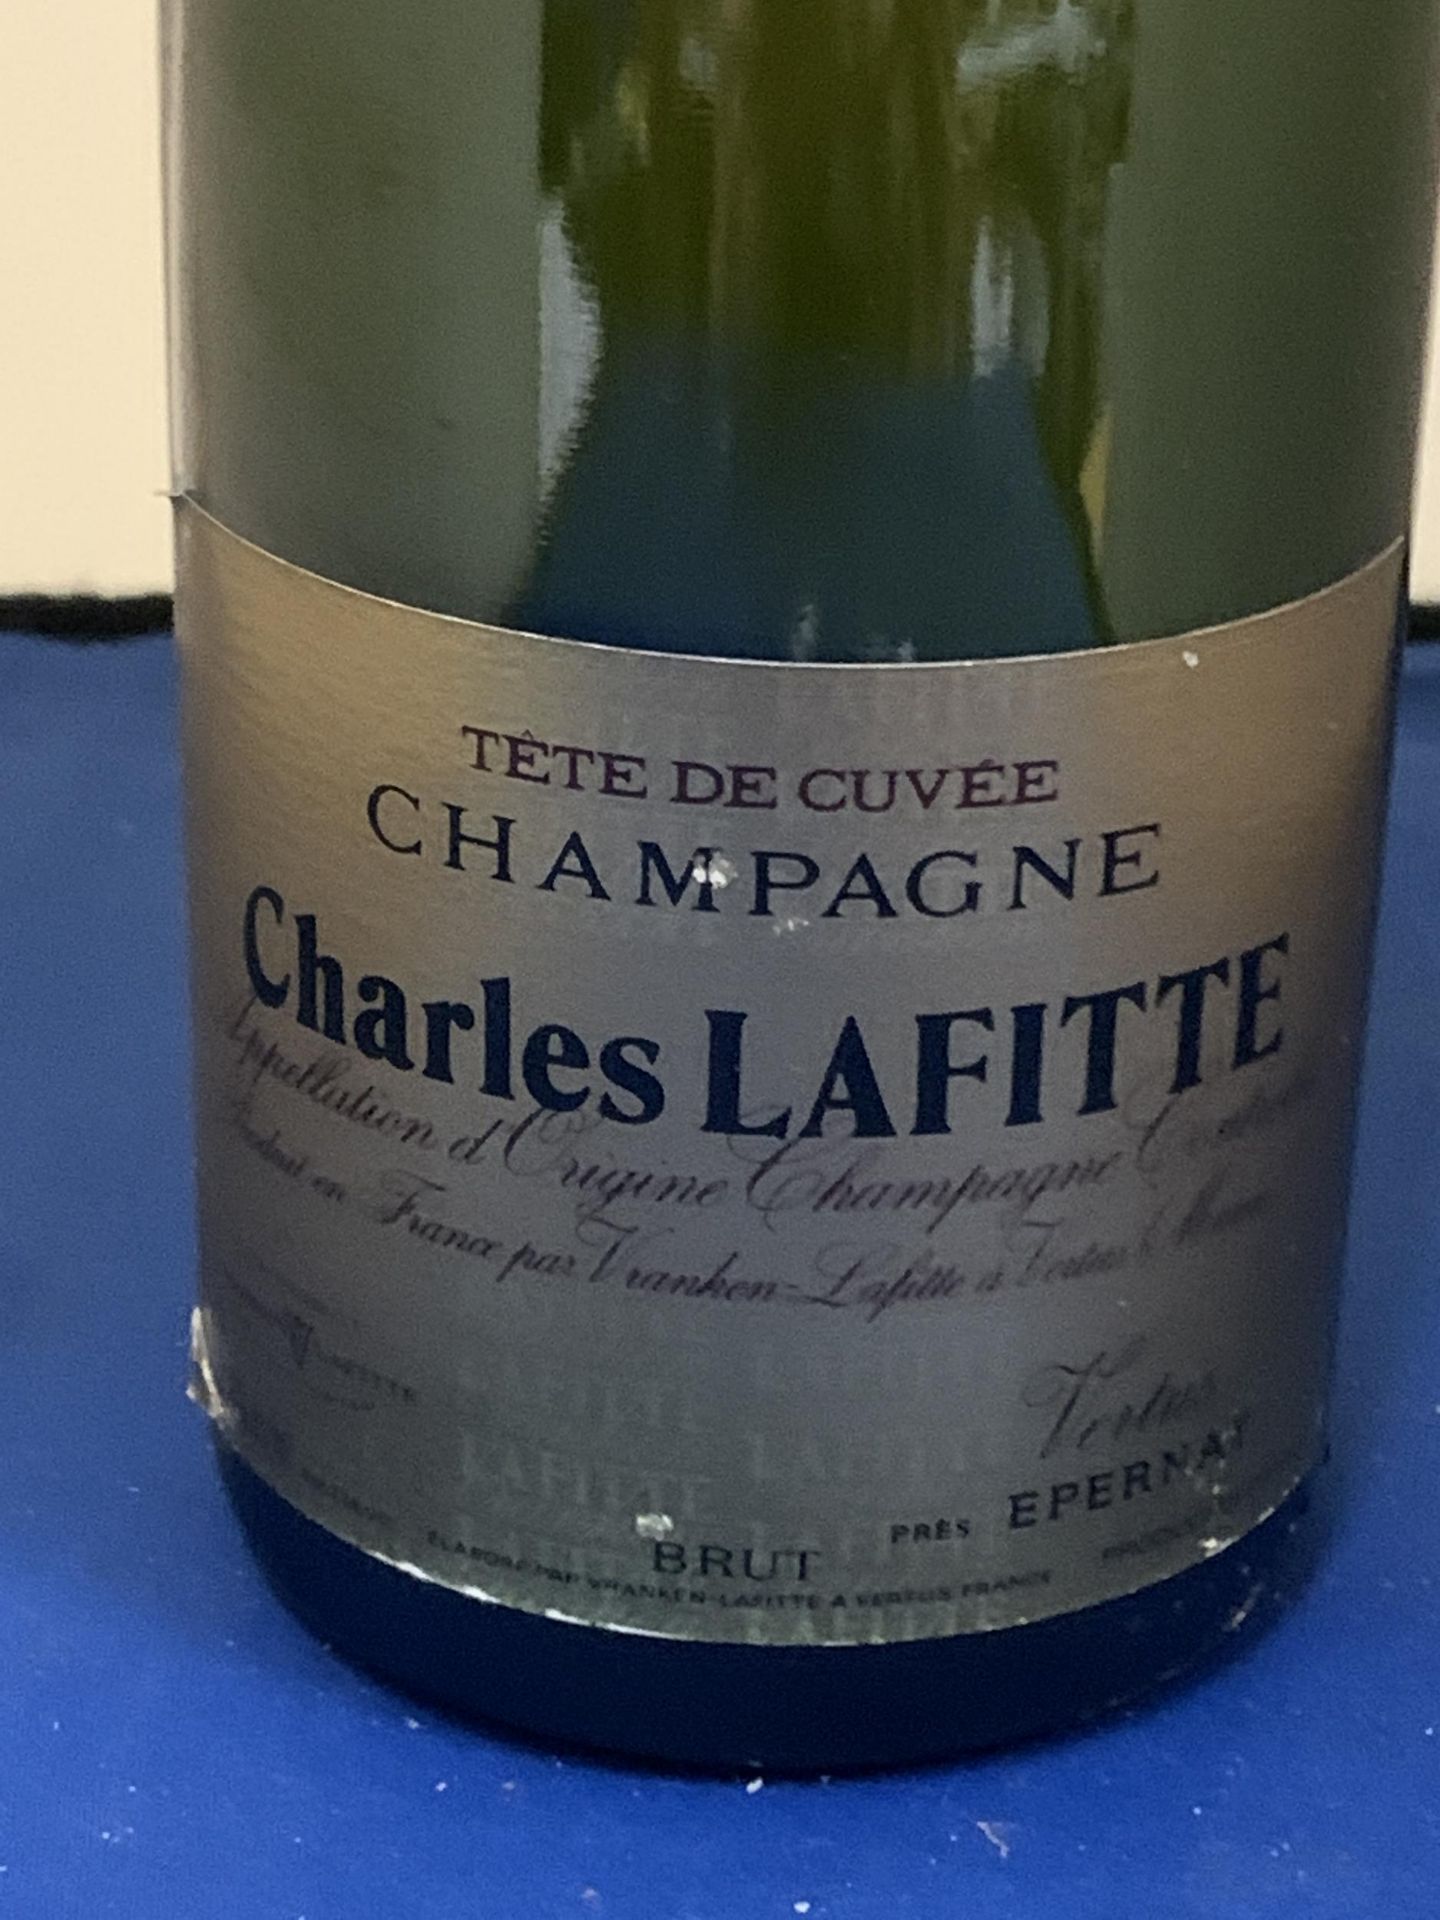 A BOTTLE OF CHARLES LAFITTE TETE DE CUVEE CHAMPAGNE - Image 2 of 4